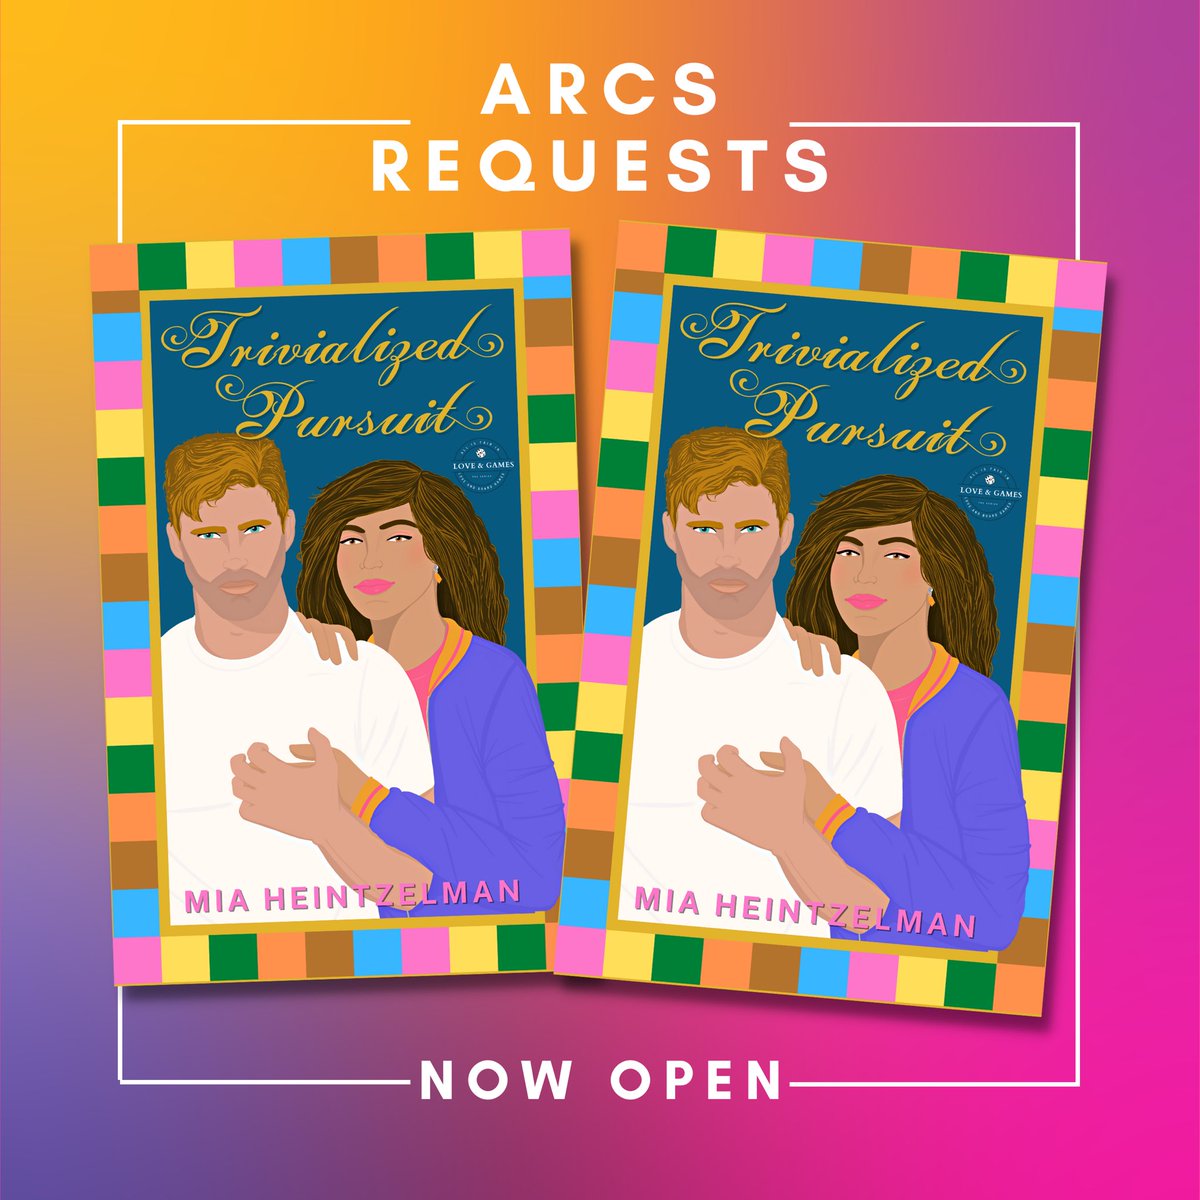 𝗔𝗥𝗖 𝗥𝗘𝗤𝗨𝗘𝗦𝗧𝗦 𝗔𝗥𝗘 𝗢𝗣𝗘𝗡 for Trivialized Pursuit 🎉

The Love & Games Series continues for Rox and Murph in a “Just friends” to lovers battle of wits and hearts. 

🔗 miaheintzelman.com/arcteam.html